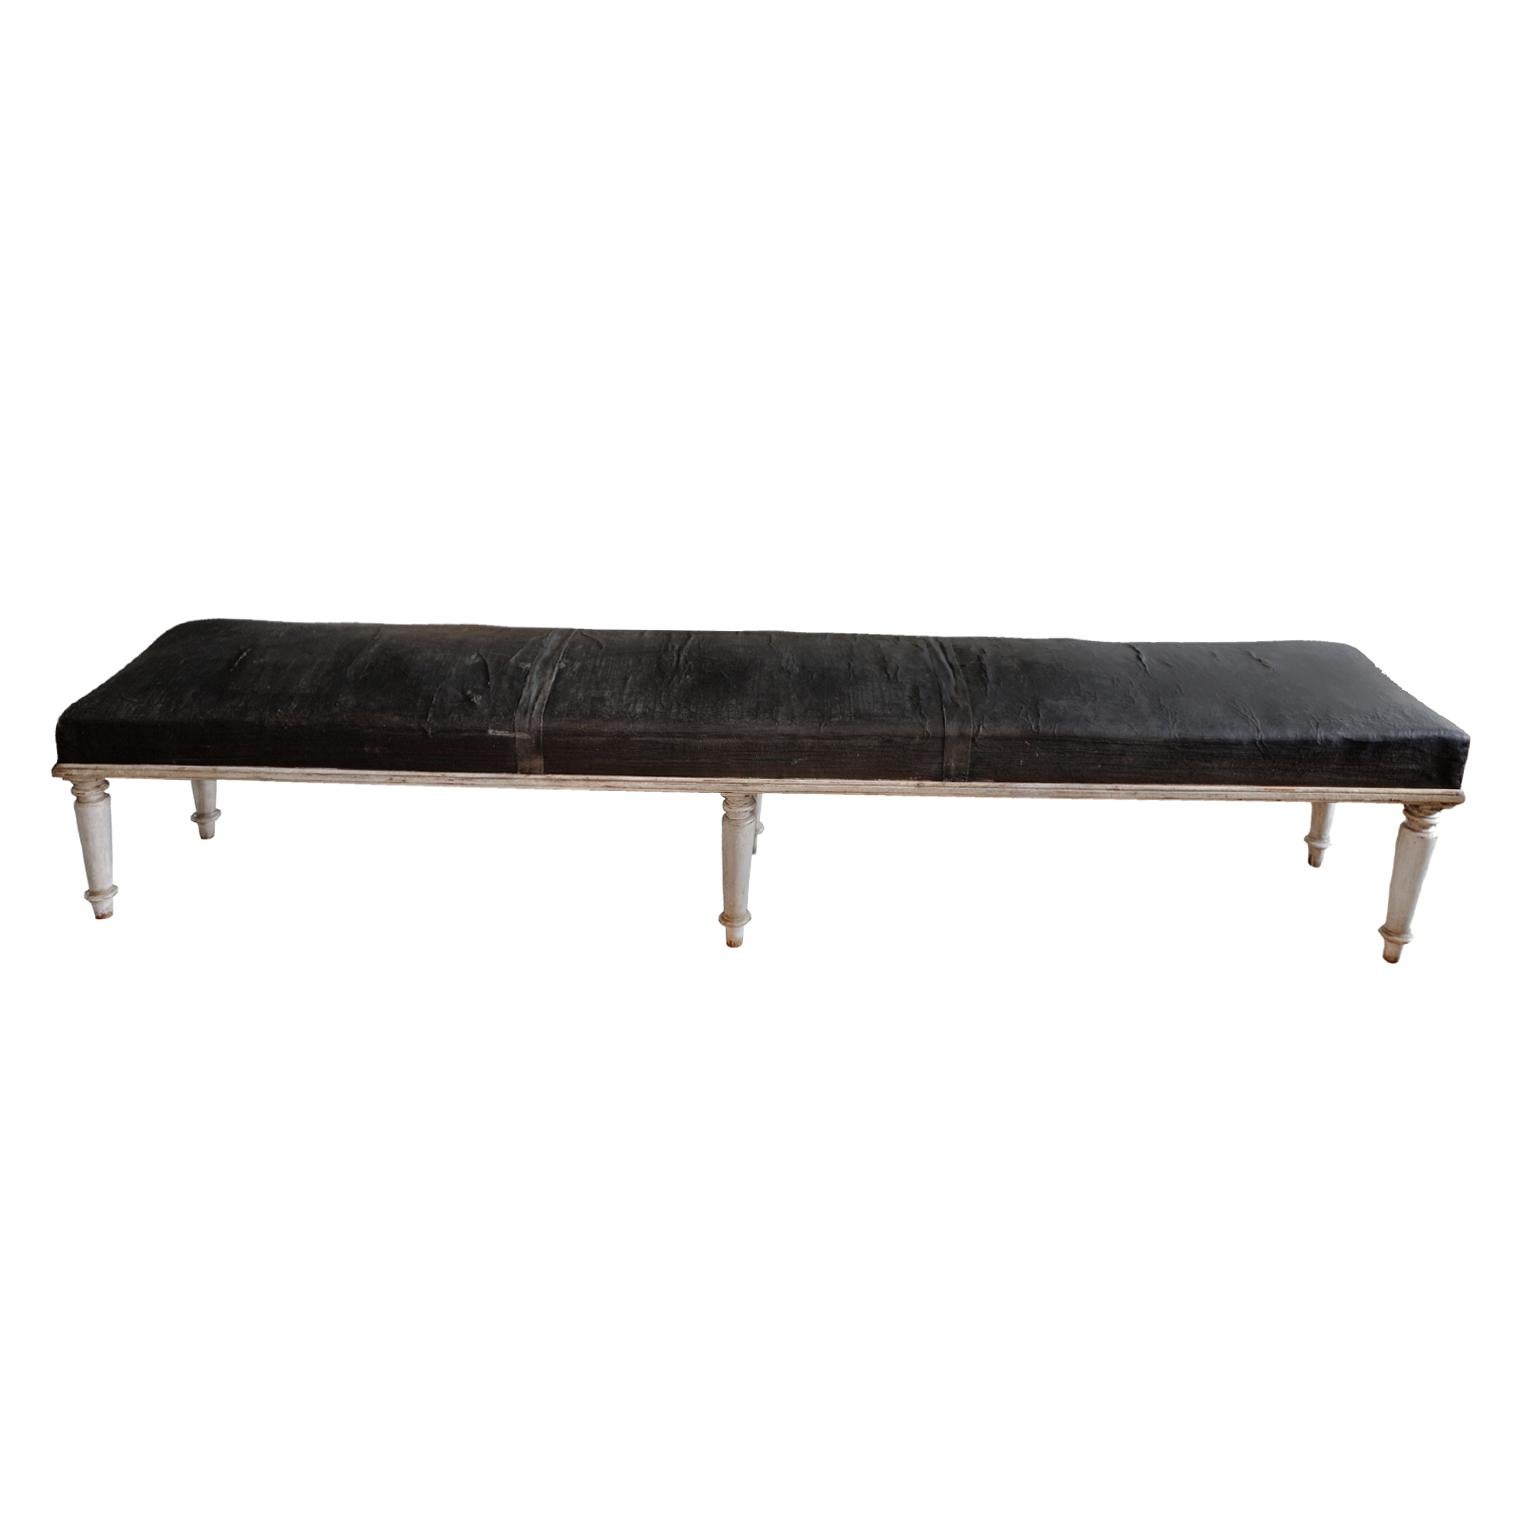 Hand-Painted Long English George IV Period Painted Hall or Gallery Bench, circa 1825 For Sale